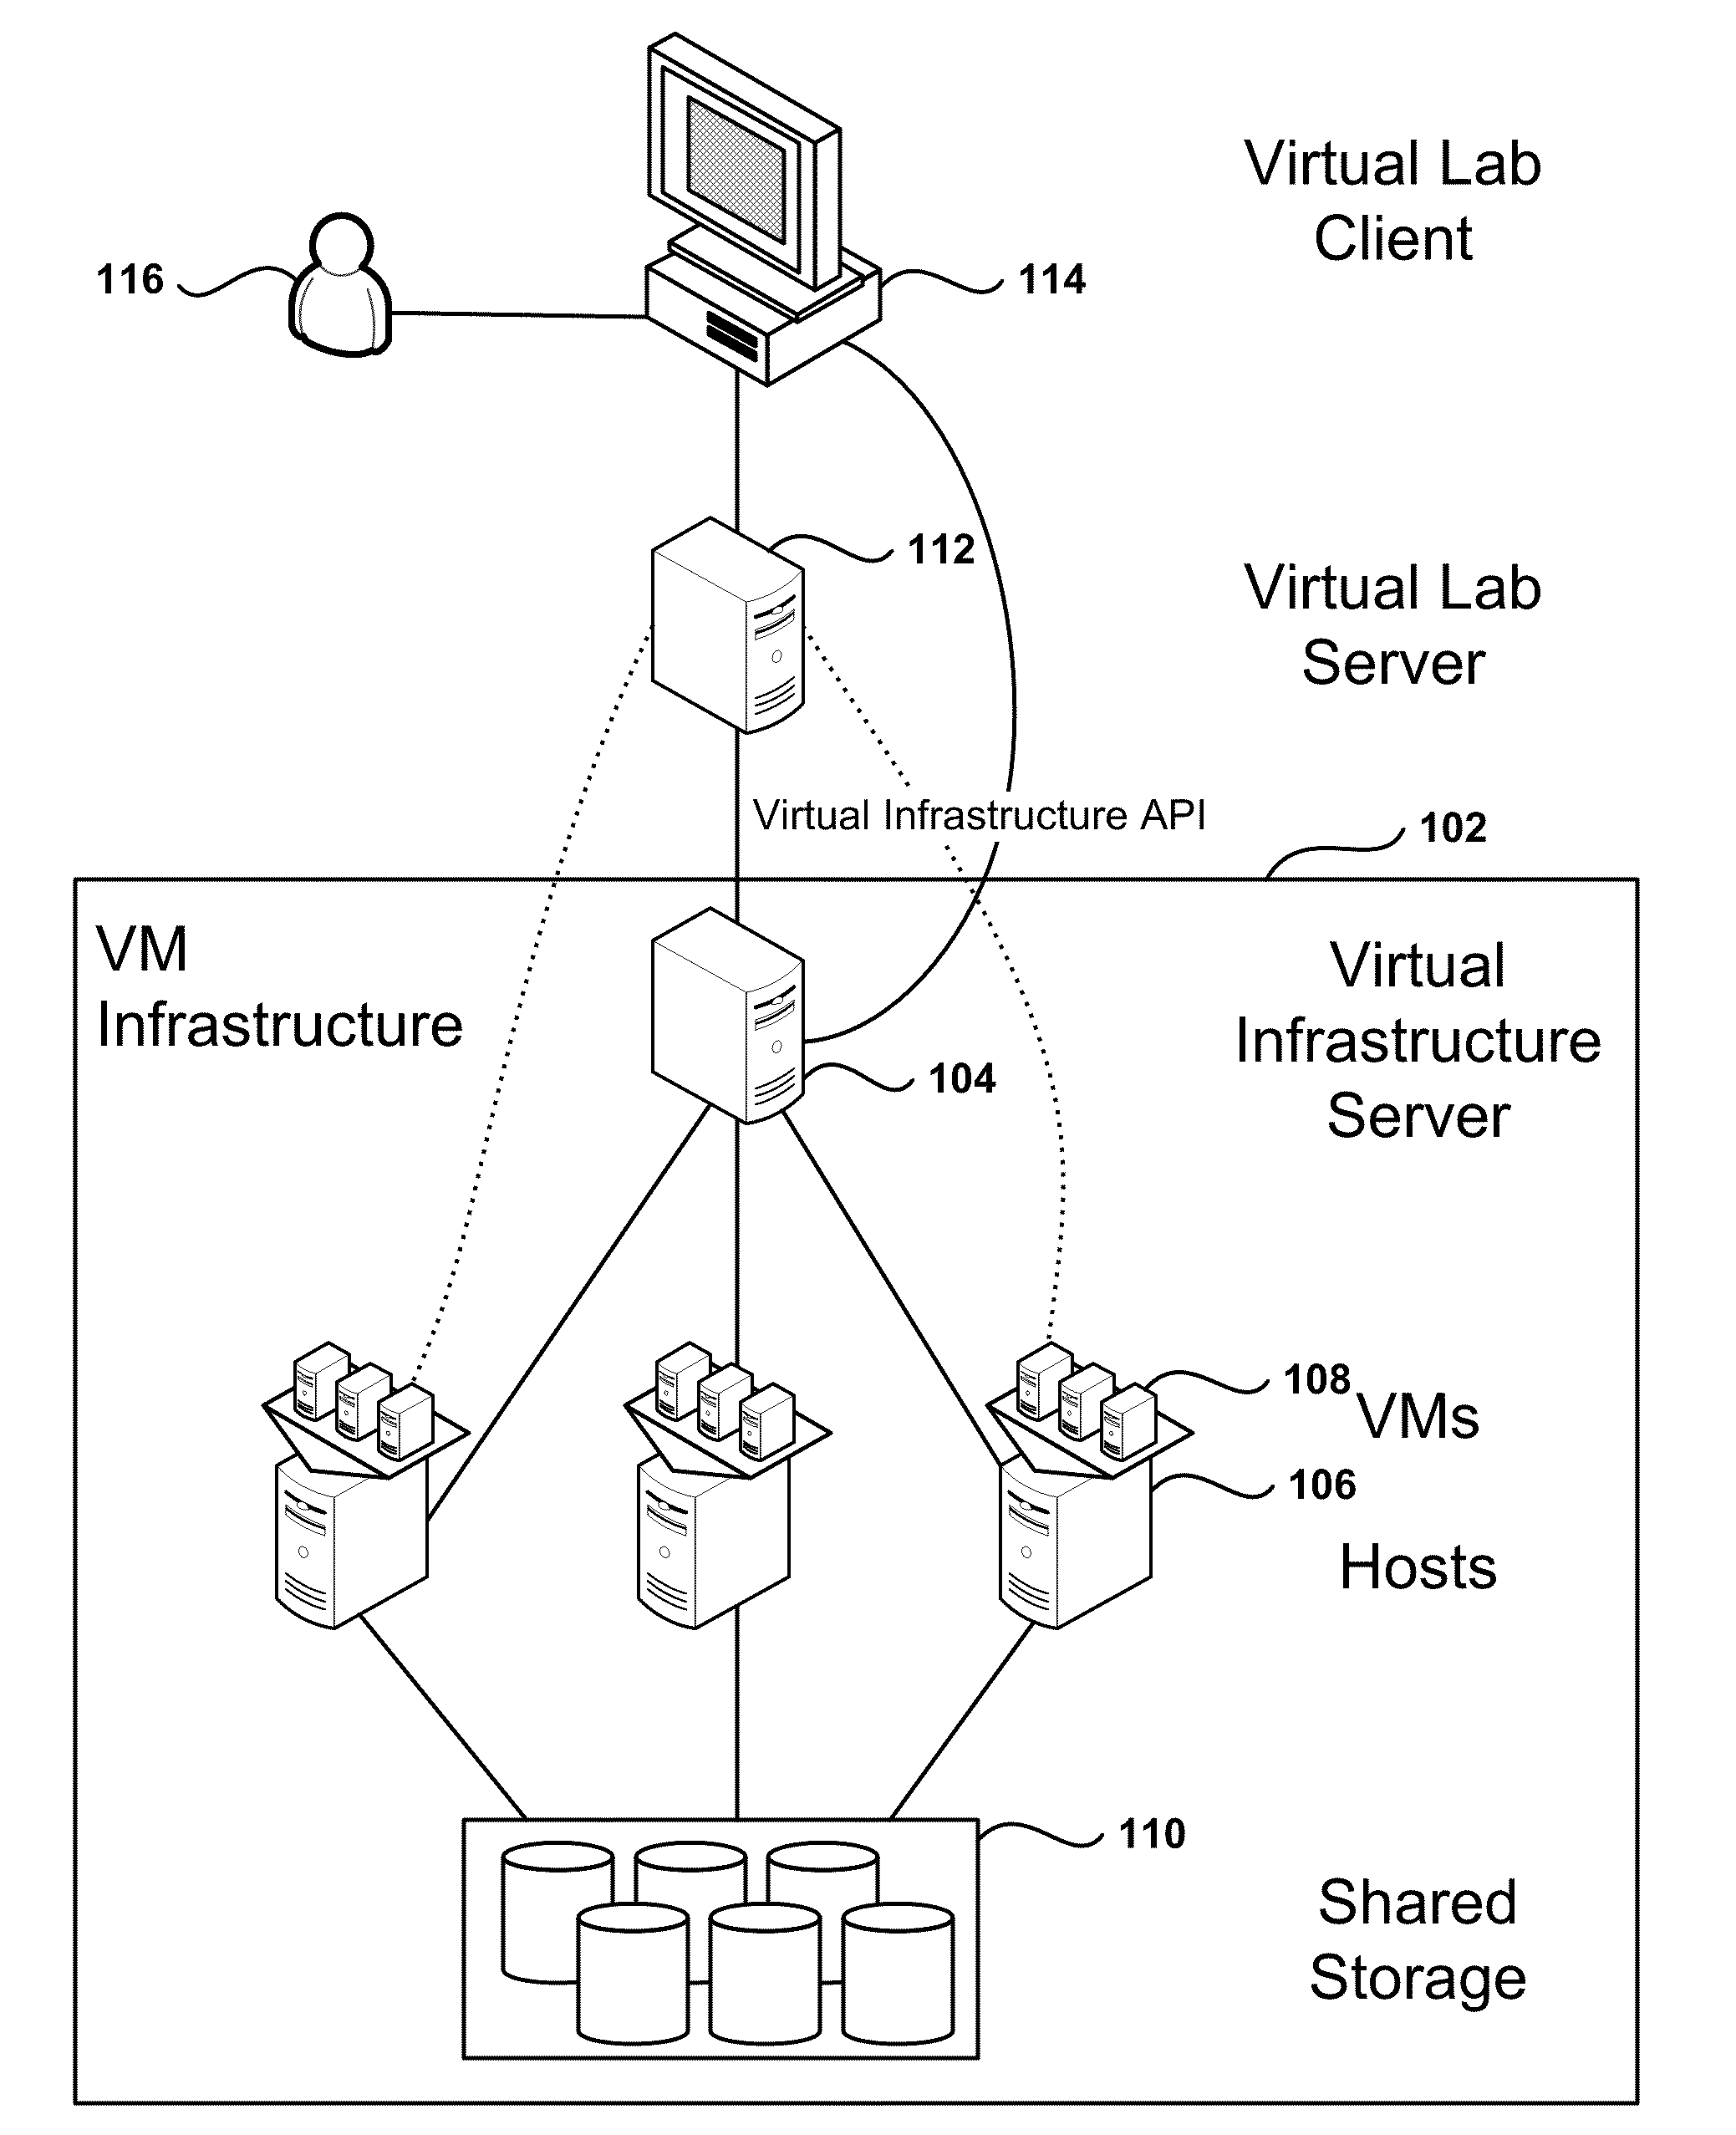 Automated Network Configuration of Virtual Machines in a Virtual Lab Environment